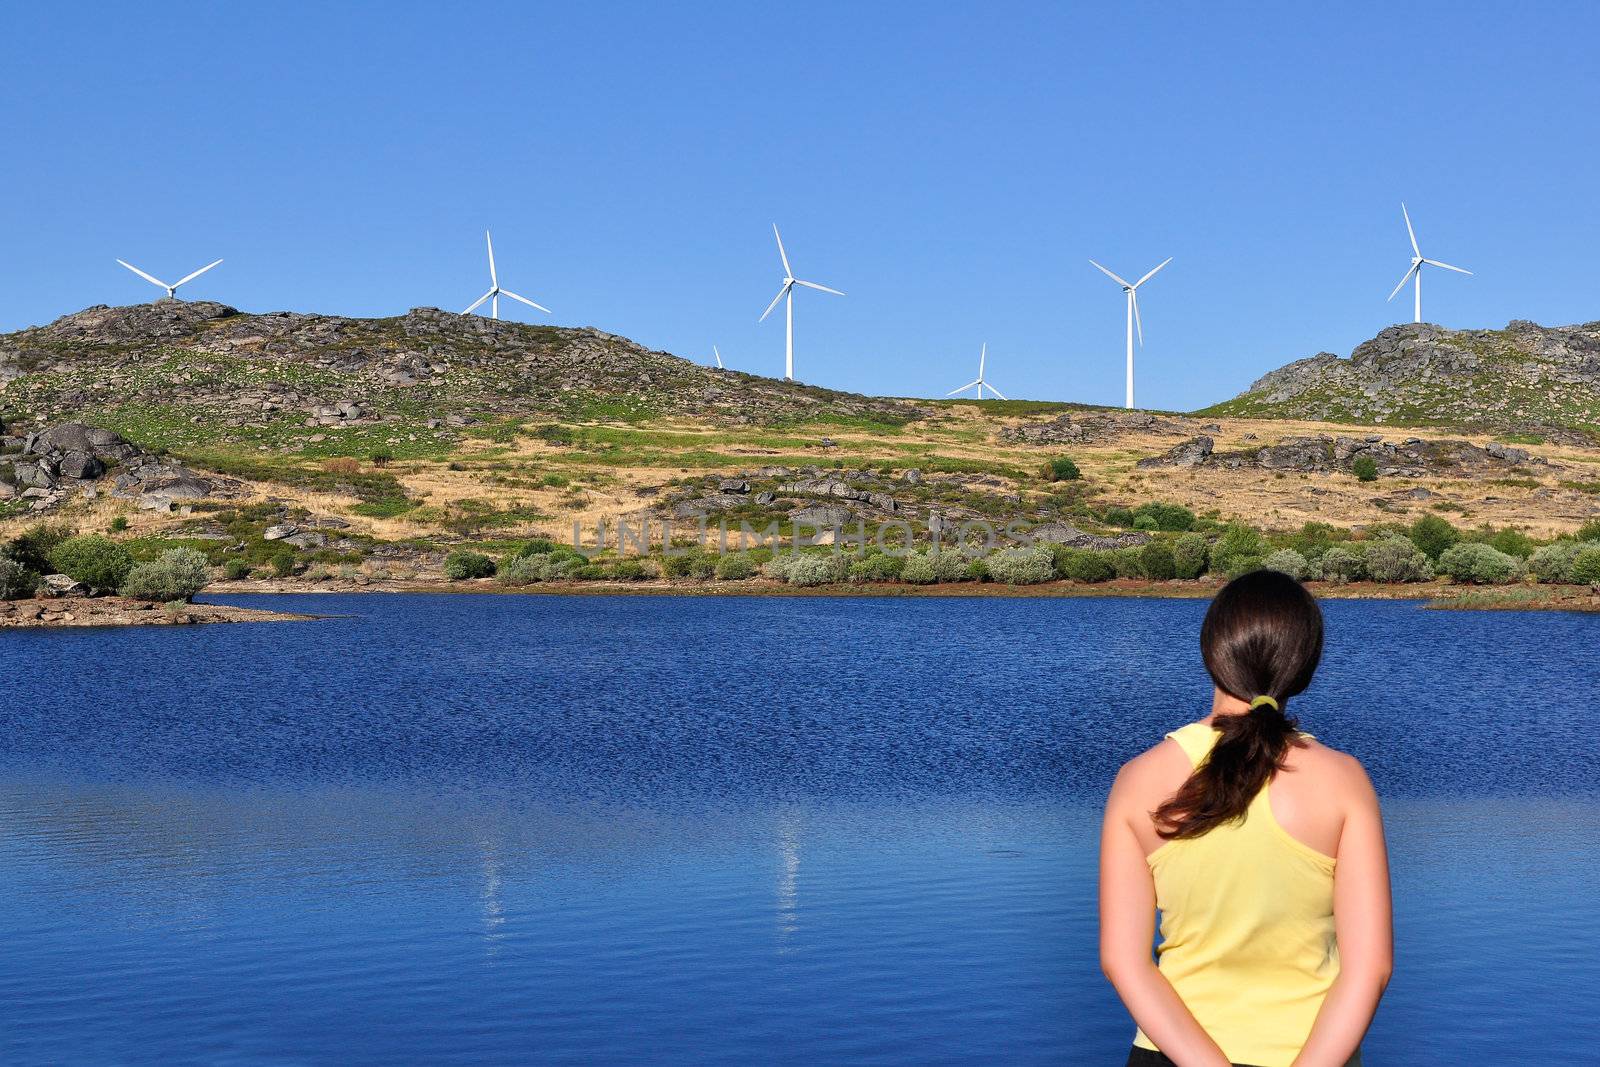 Woman looking at a wind mill across a lake. Focus is on the wind turbines and the woman is slightly out of focus.